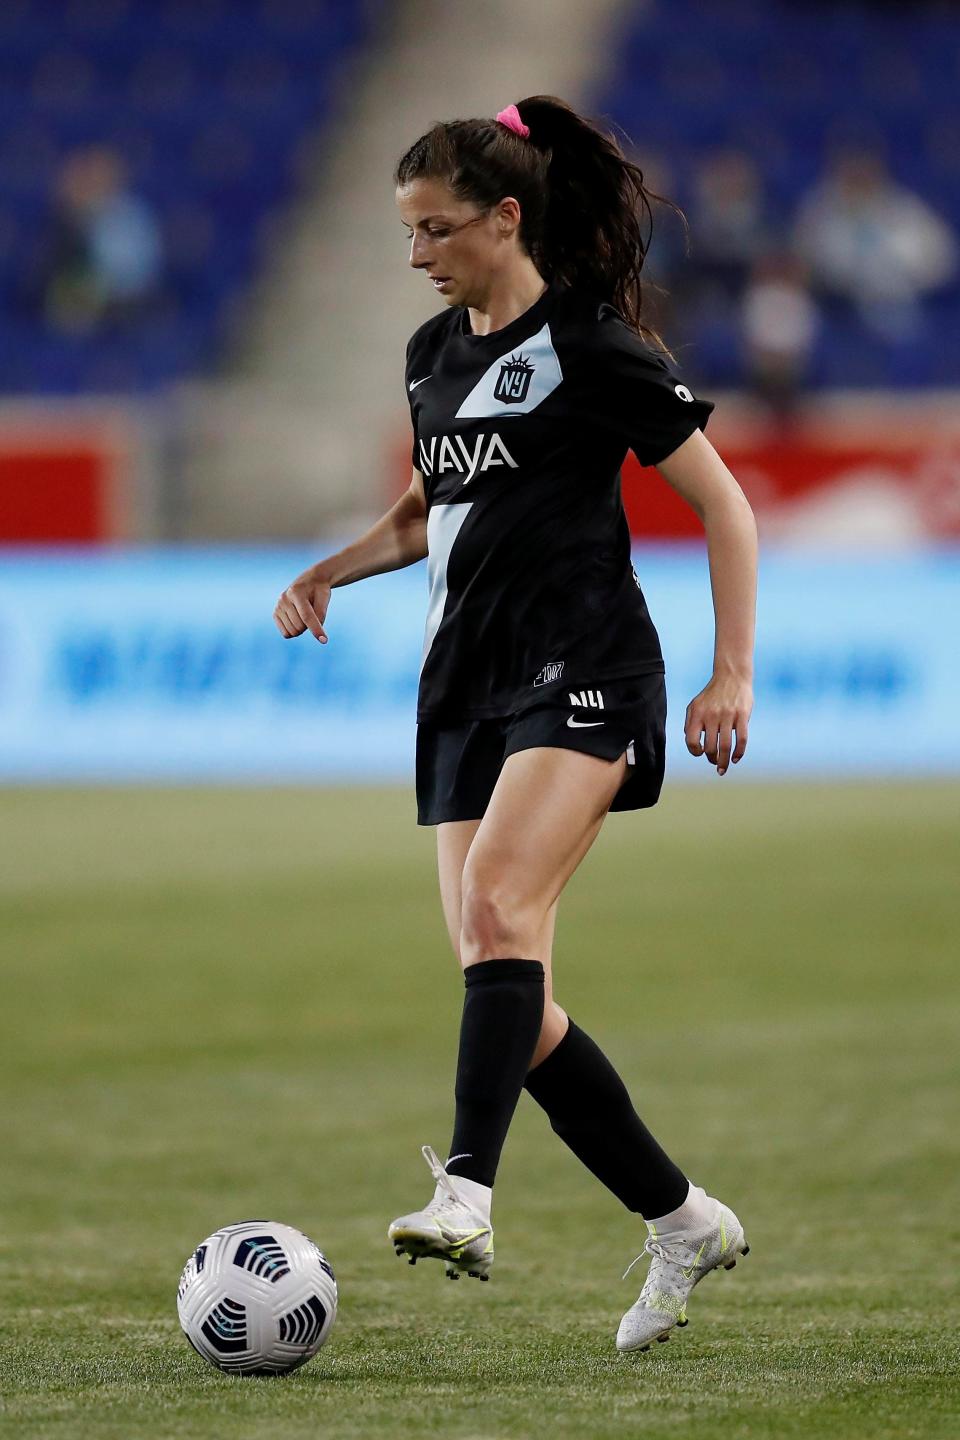 Gotham FC forward Paige Monaghan (4) moves the ball up the pitch during the second half of an NWSL soccer match against the Houston Dash, Saturday, May 15, 2021, in Harrison, N.J. Gotham FC won 1-0. (AP Photo/Steve Luciano)